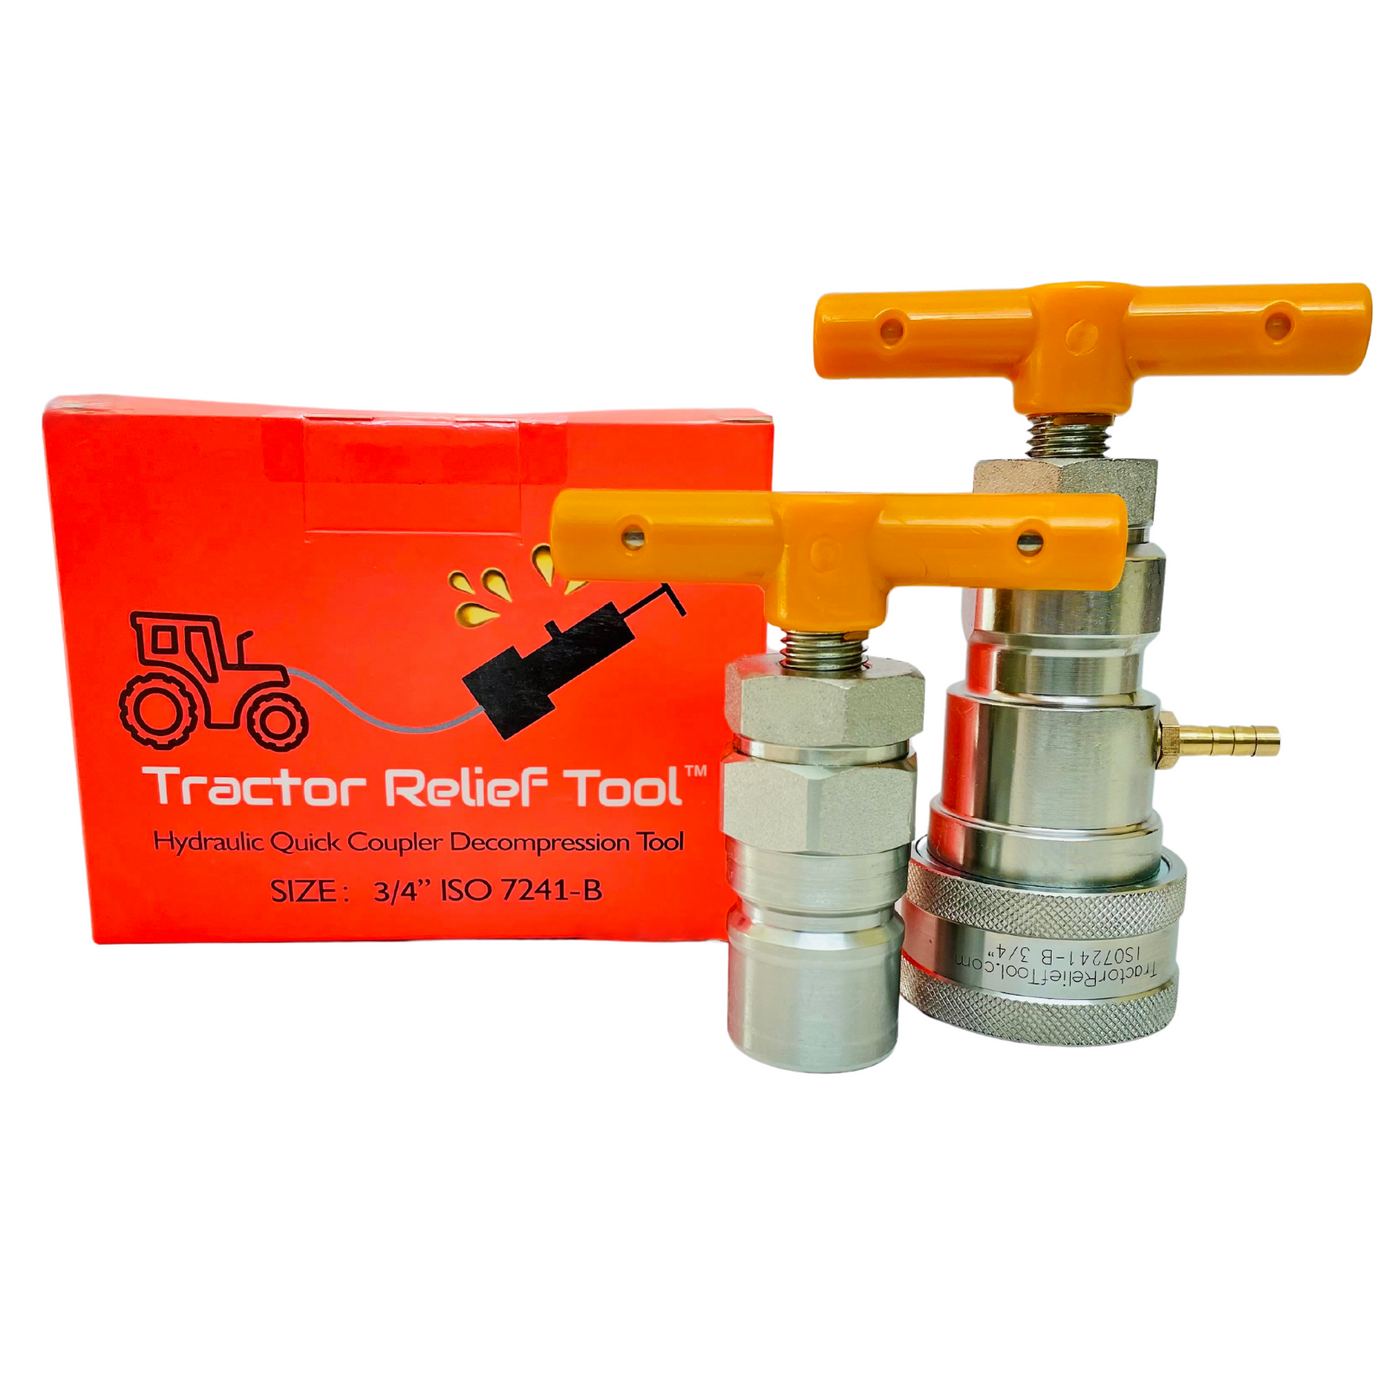 3/4" ISO 7241-B Hydraulic Quick Coupler Pressure Decompression Relief Release Tool